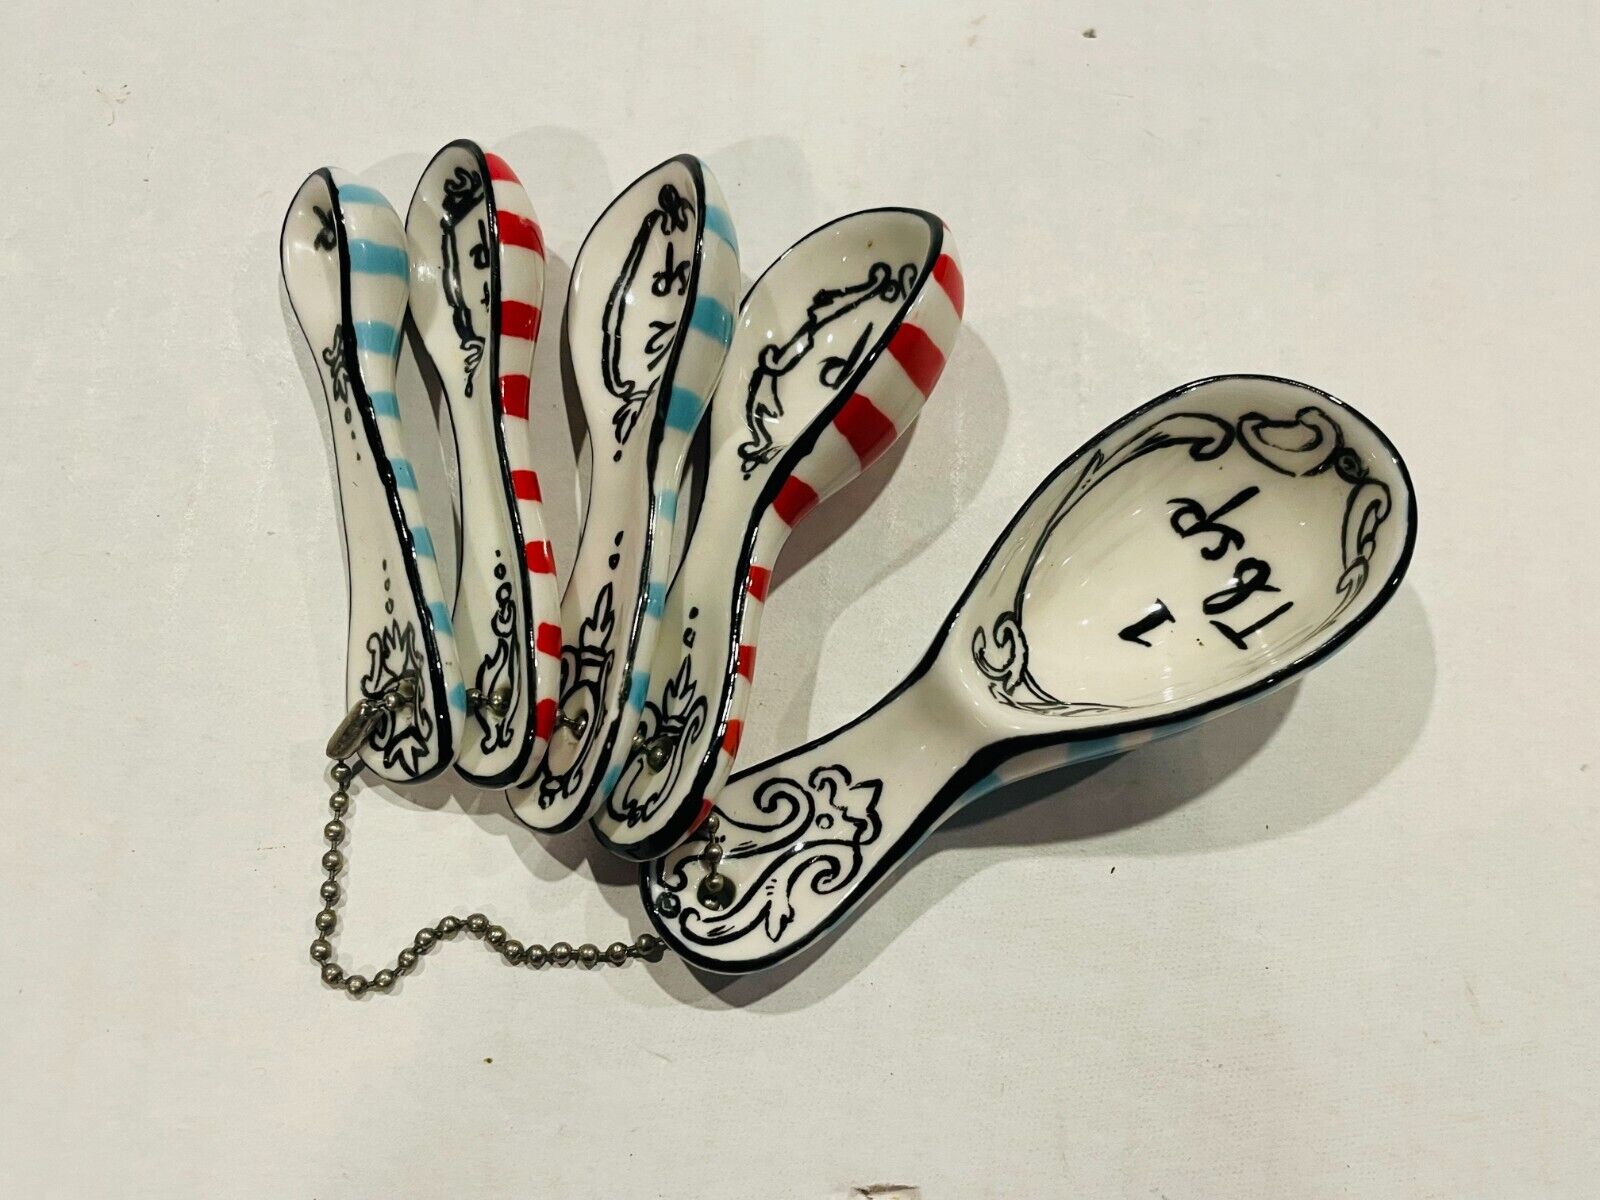 ANTHROPOLOGIE Molly Hatch Ceramic Striped Measuring Spoons